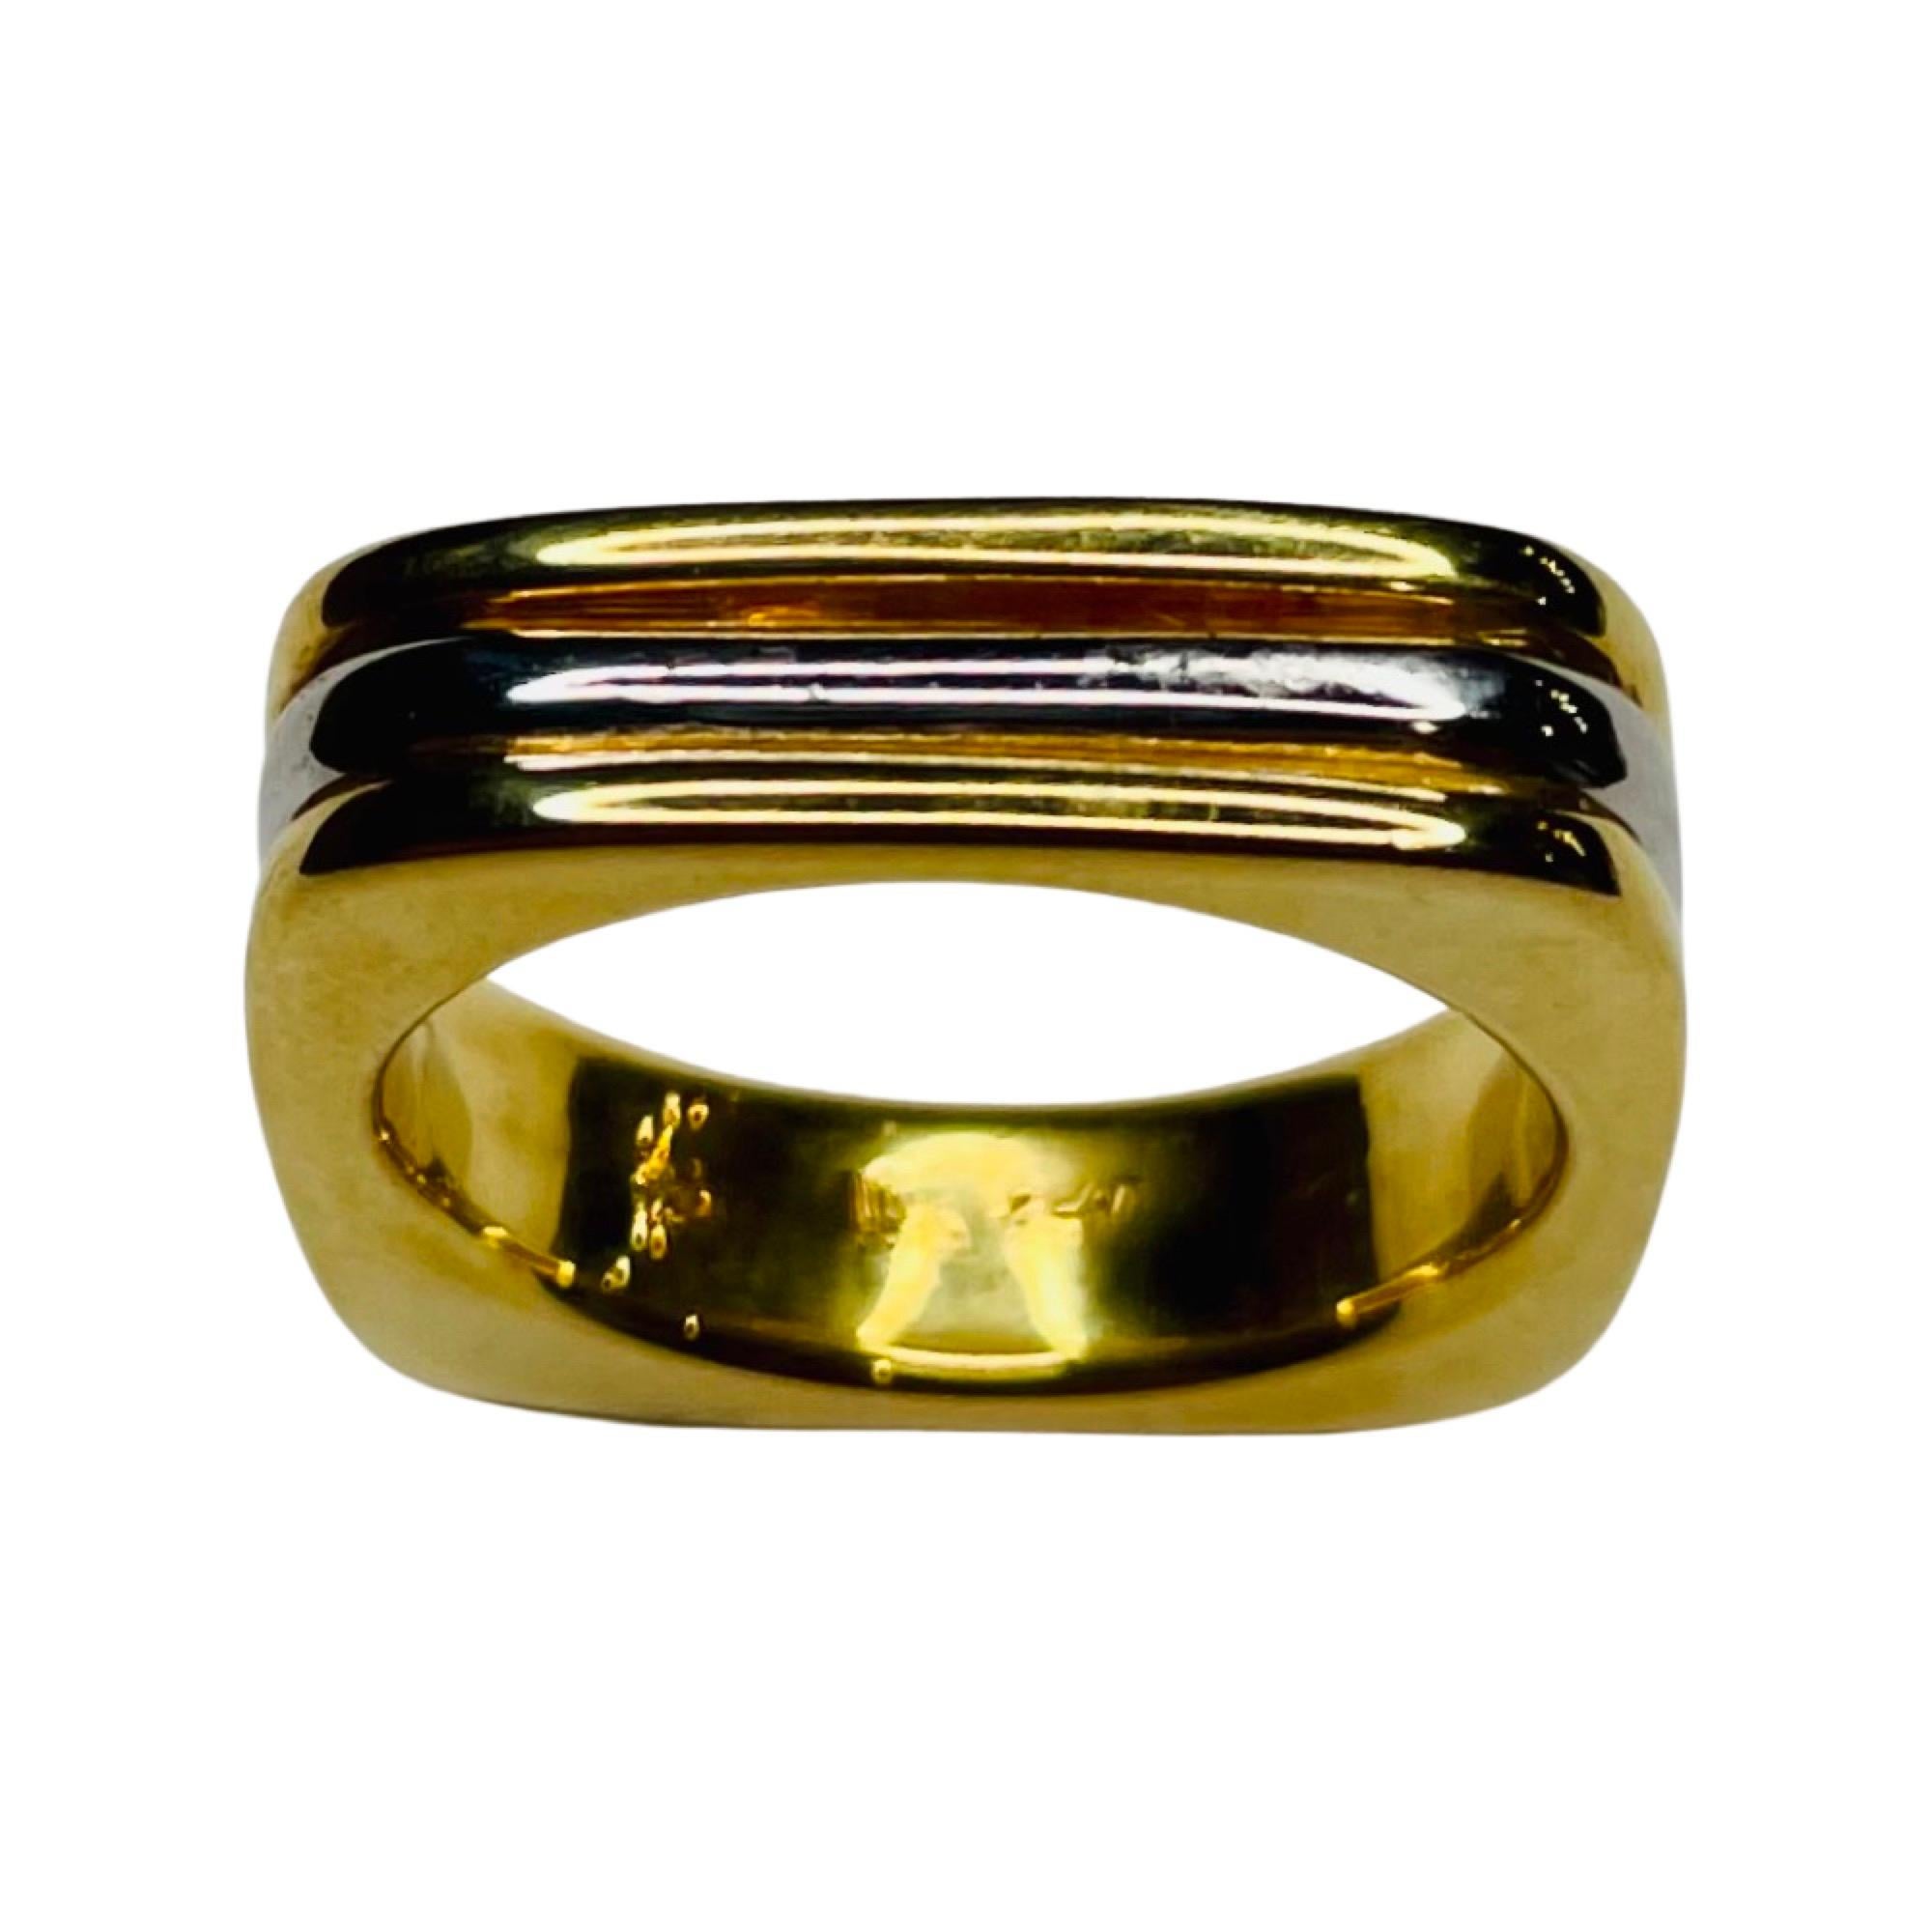 Lithos Platinum 18K Yellow Gold Wedding Band. This ring is 5.48 mm wide.  It is comfort fit. It is finger size 6.25 but we can size this for an additional fee. It is a square ring.
100-90-398